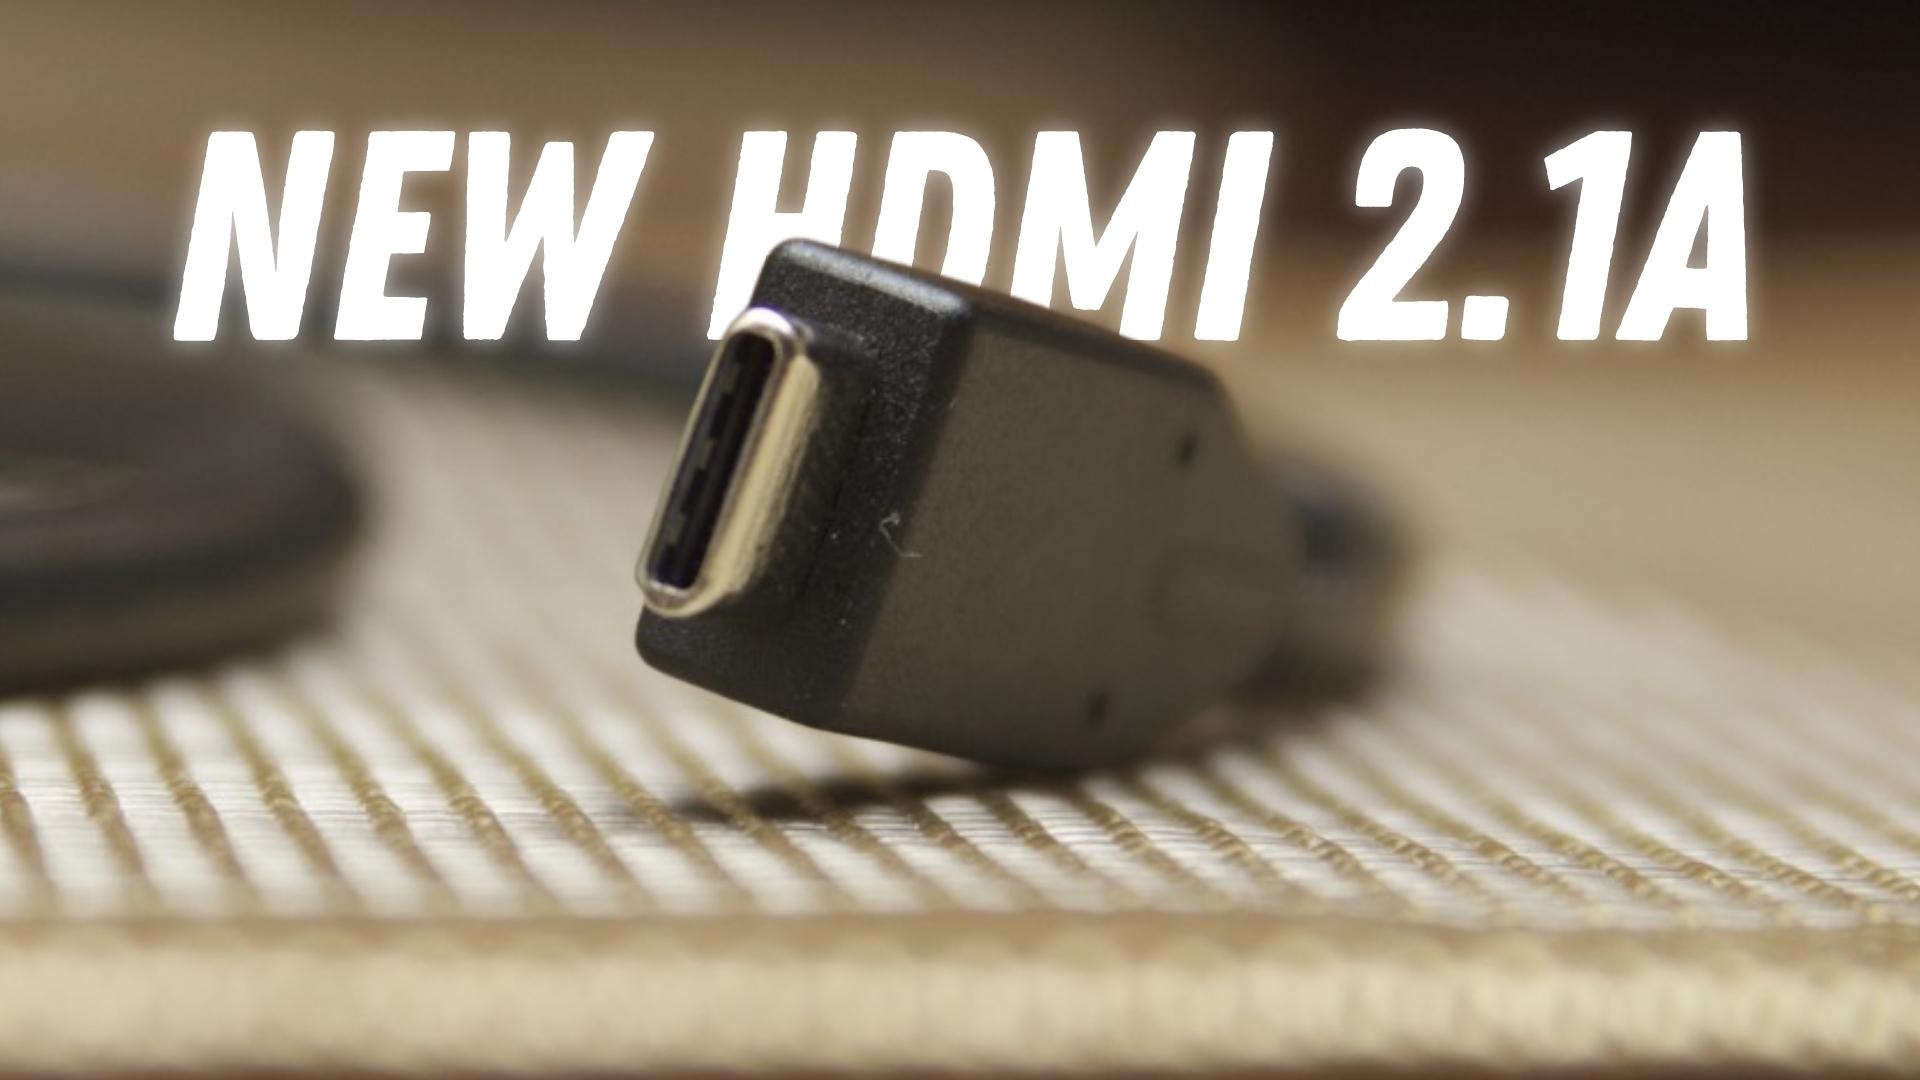 New HDMI 2.1a standard will be introduced at the CES 2022